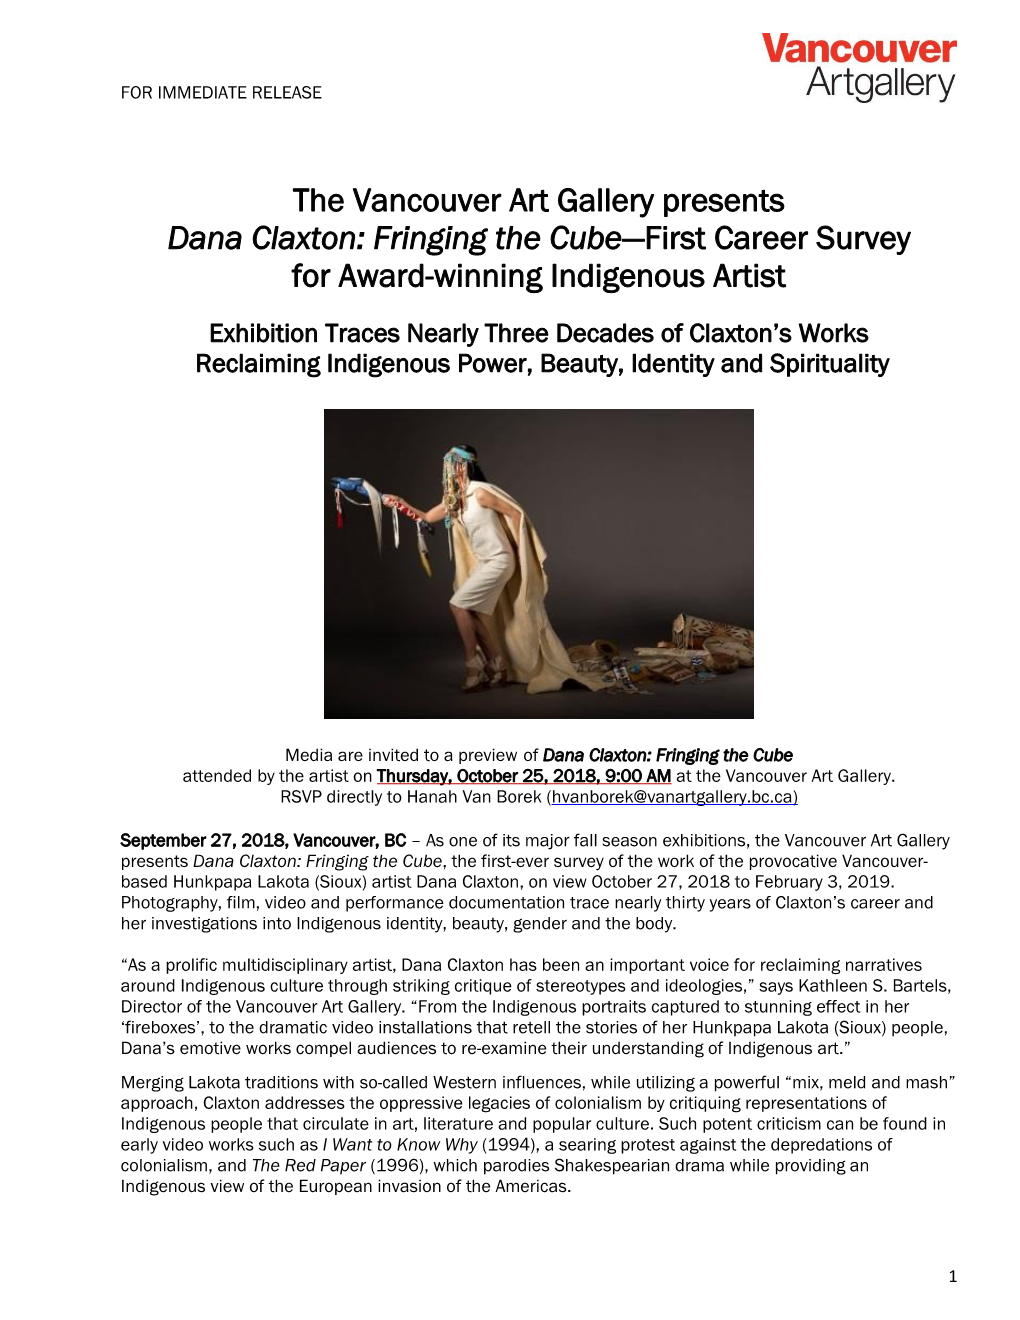 The Vancouver Art Gallery Presents Dana Claxton: Fringing the Cube—First Career Survey for Award-Winning Indigenous Artist